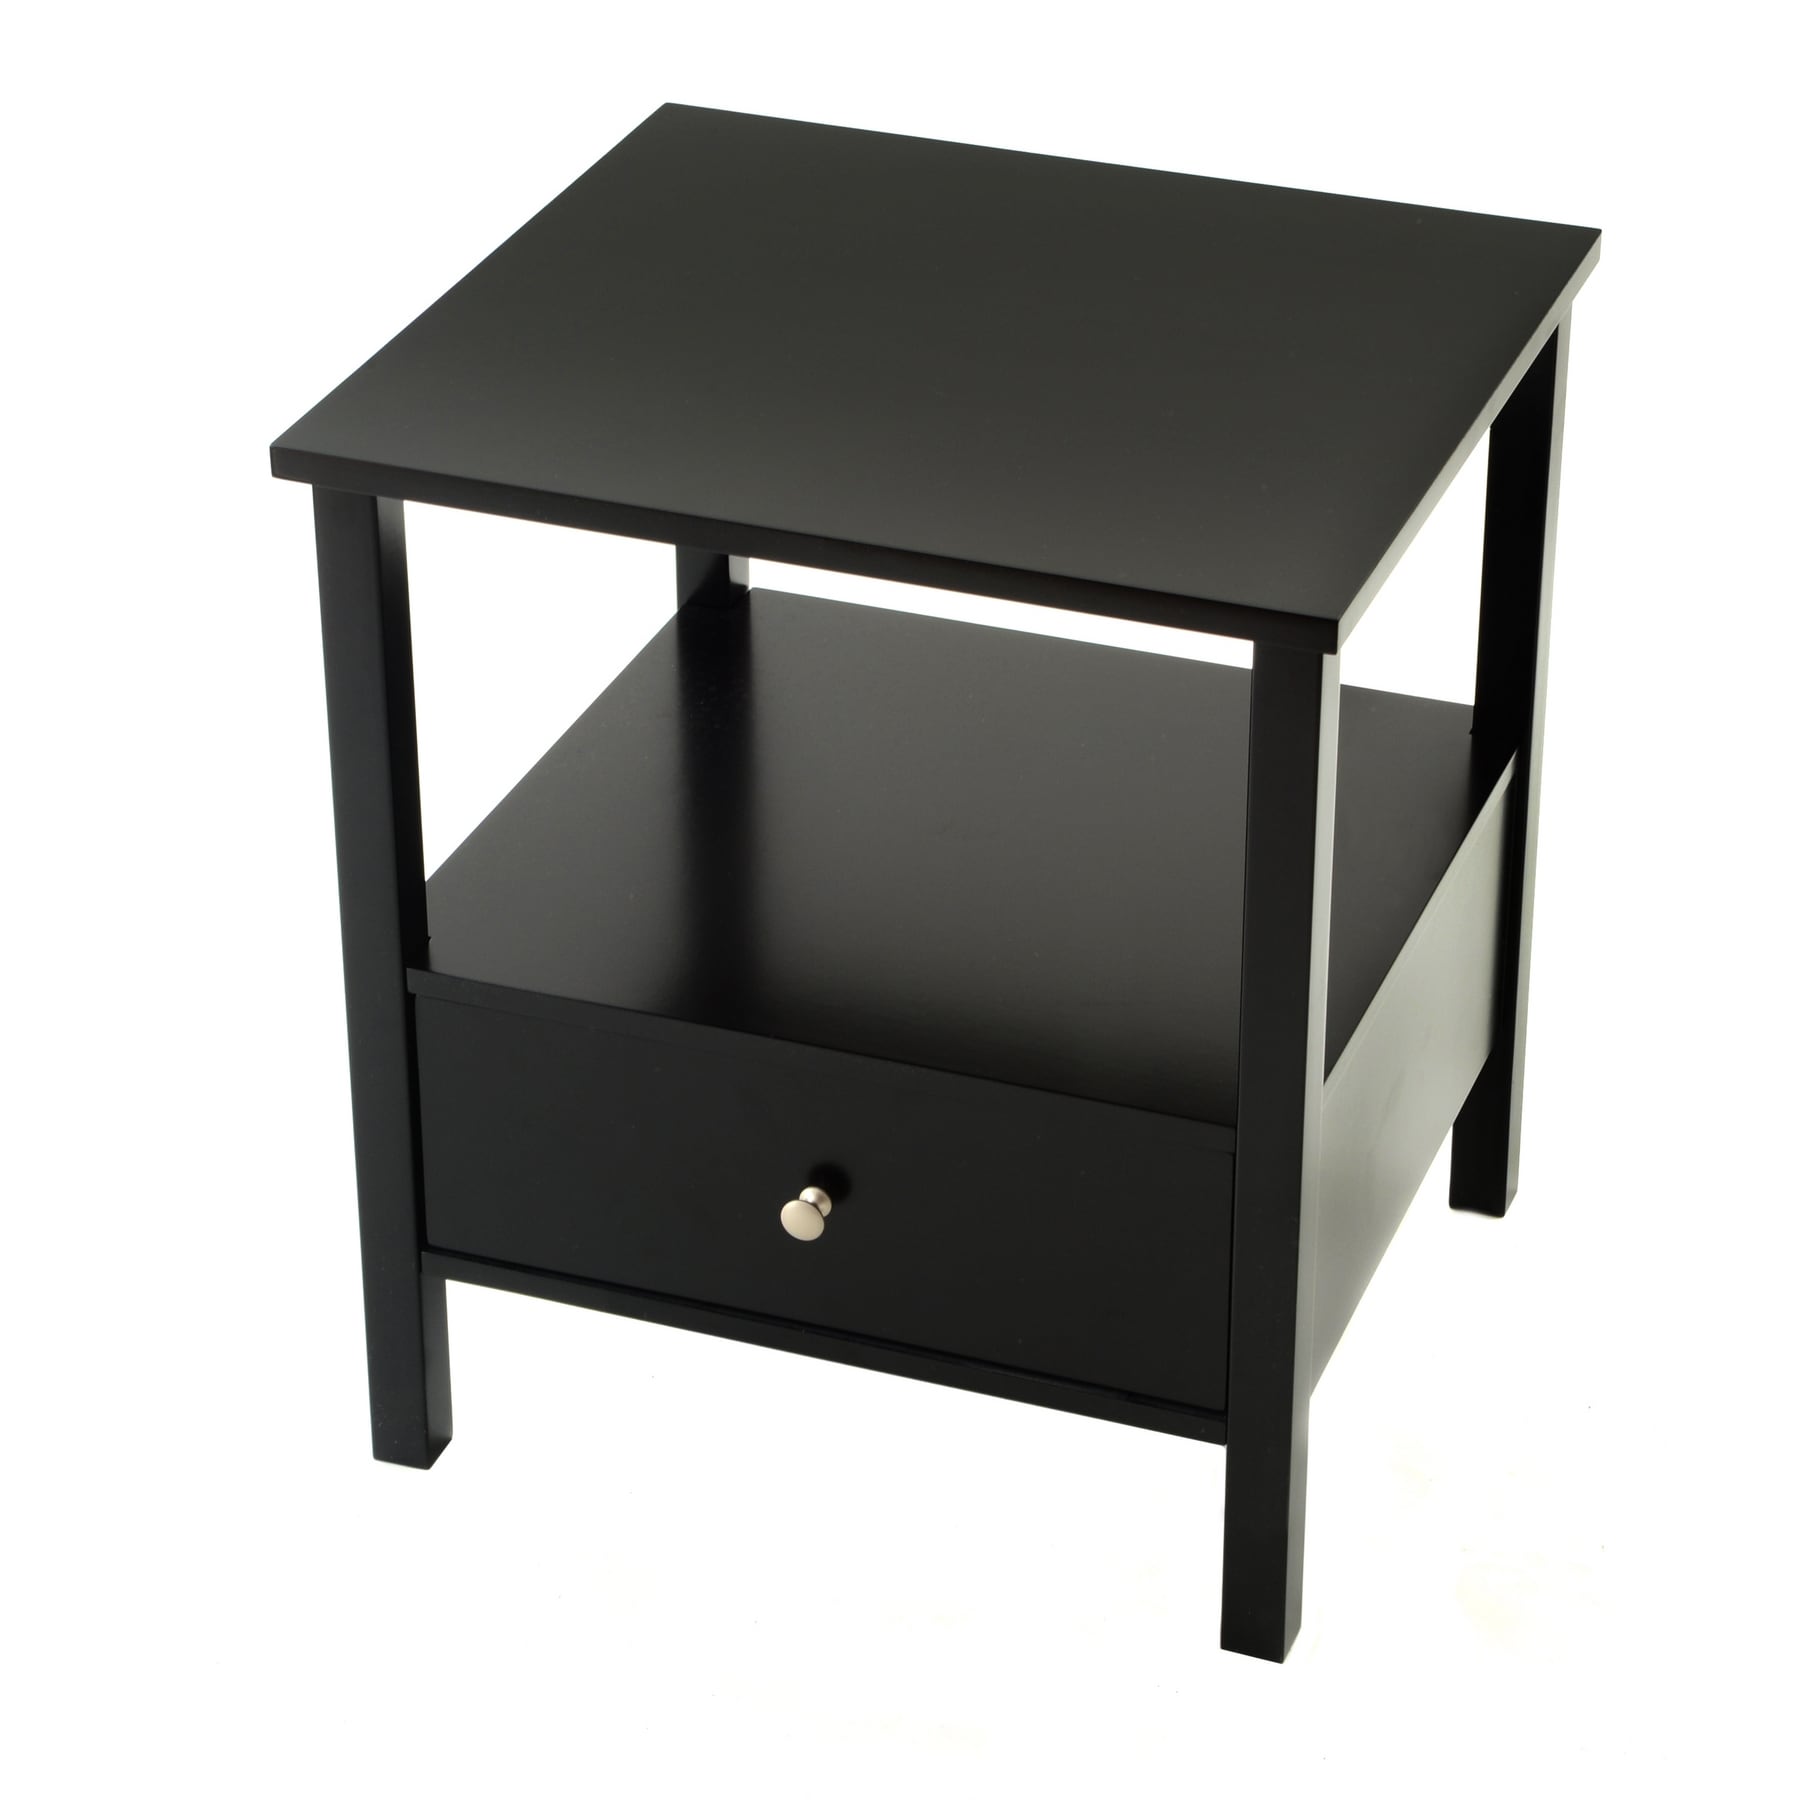 Collection Black End Table Today $179.99 4.2 (5 reviews)